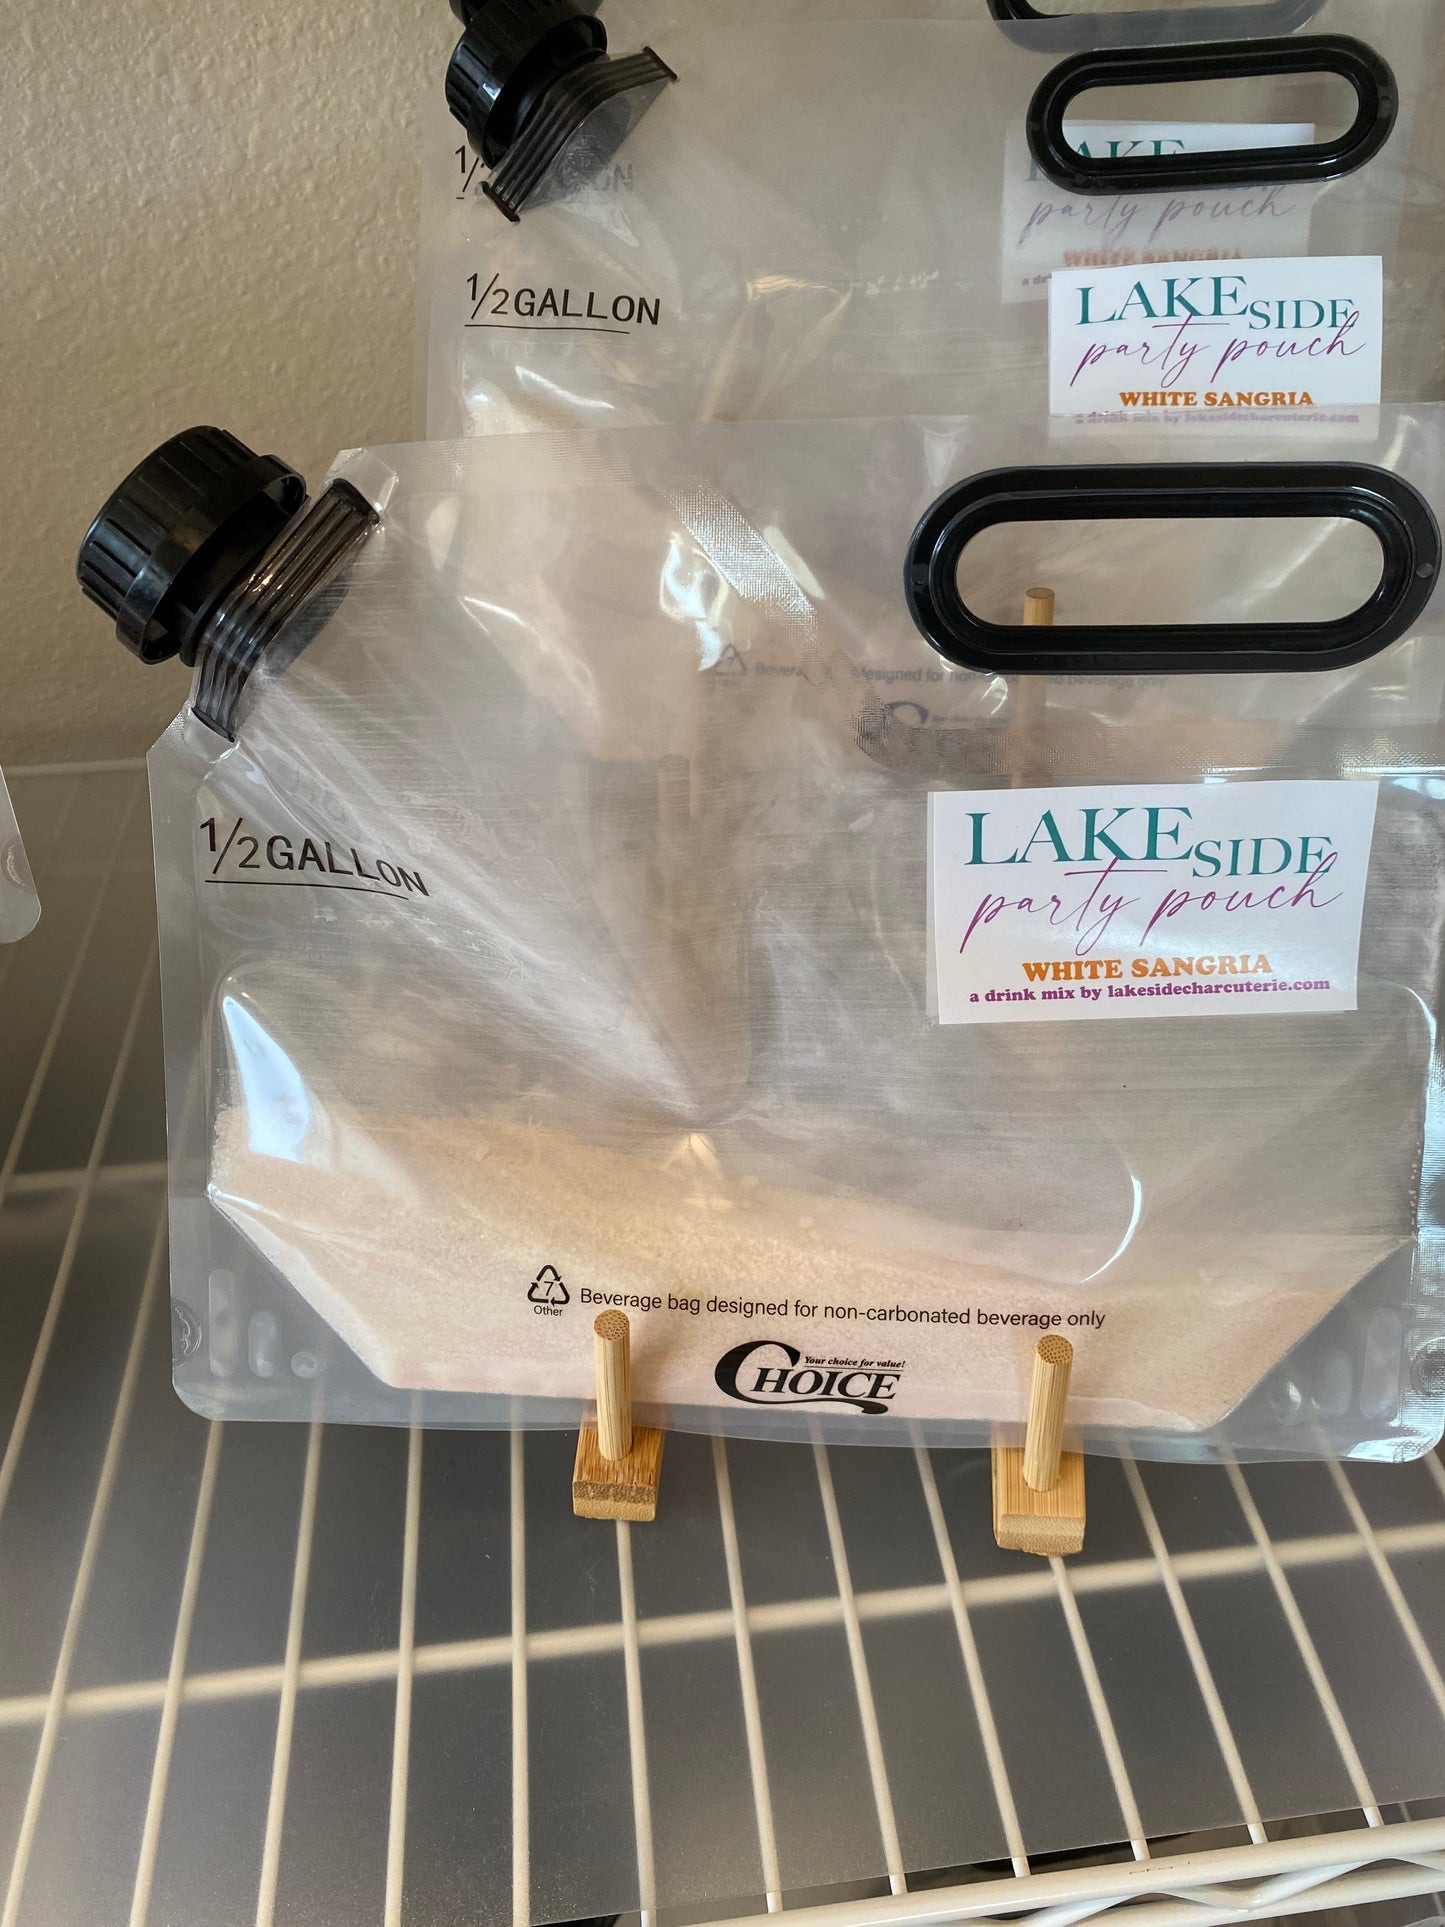 Party Pouch - 1/2 Gallon of Cocktails